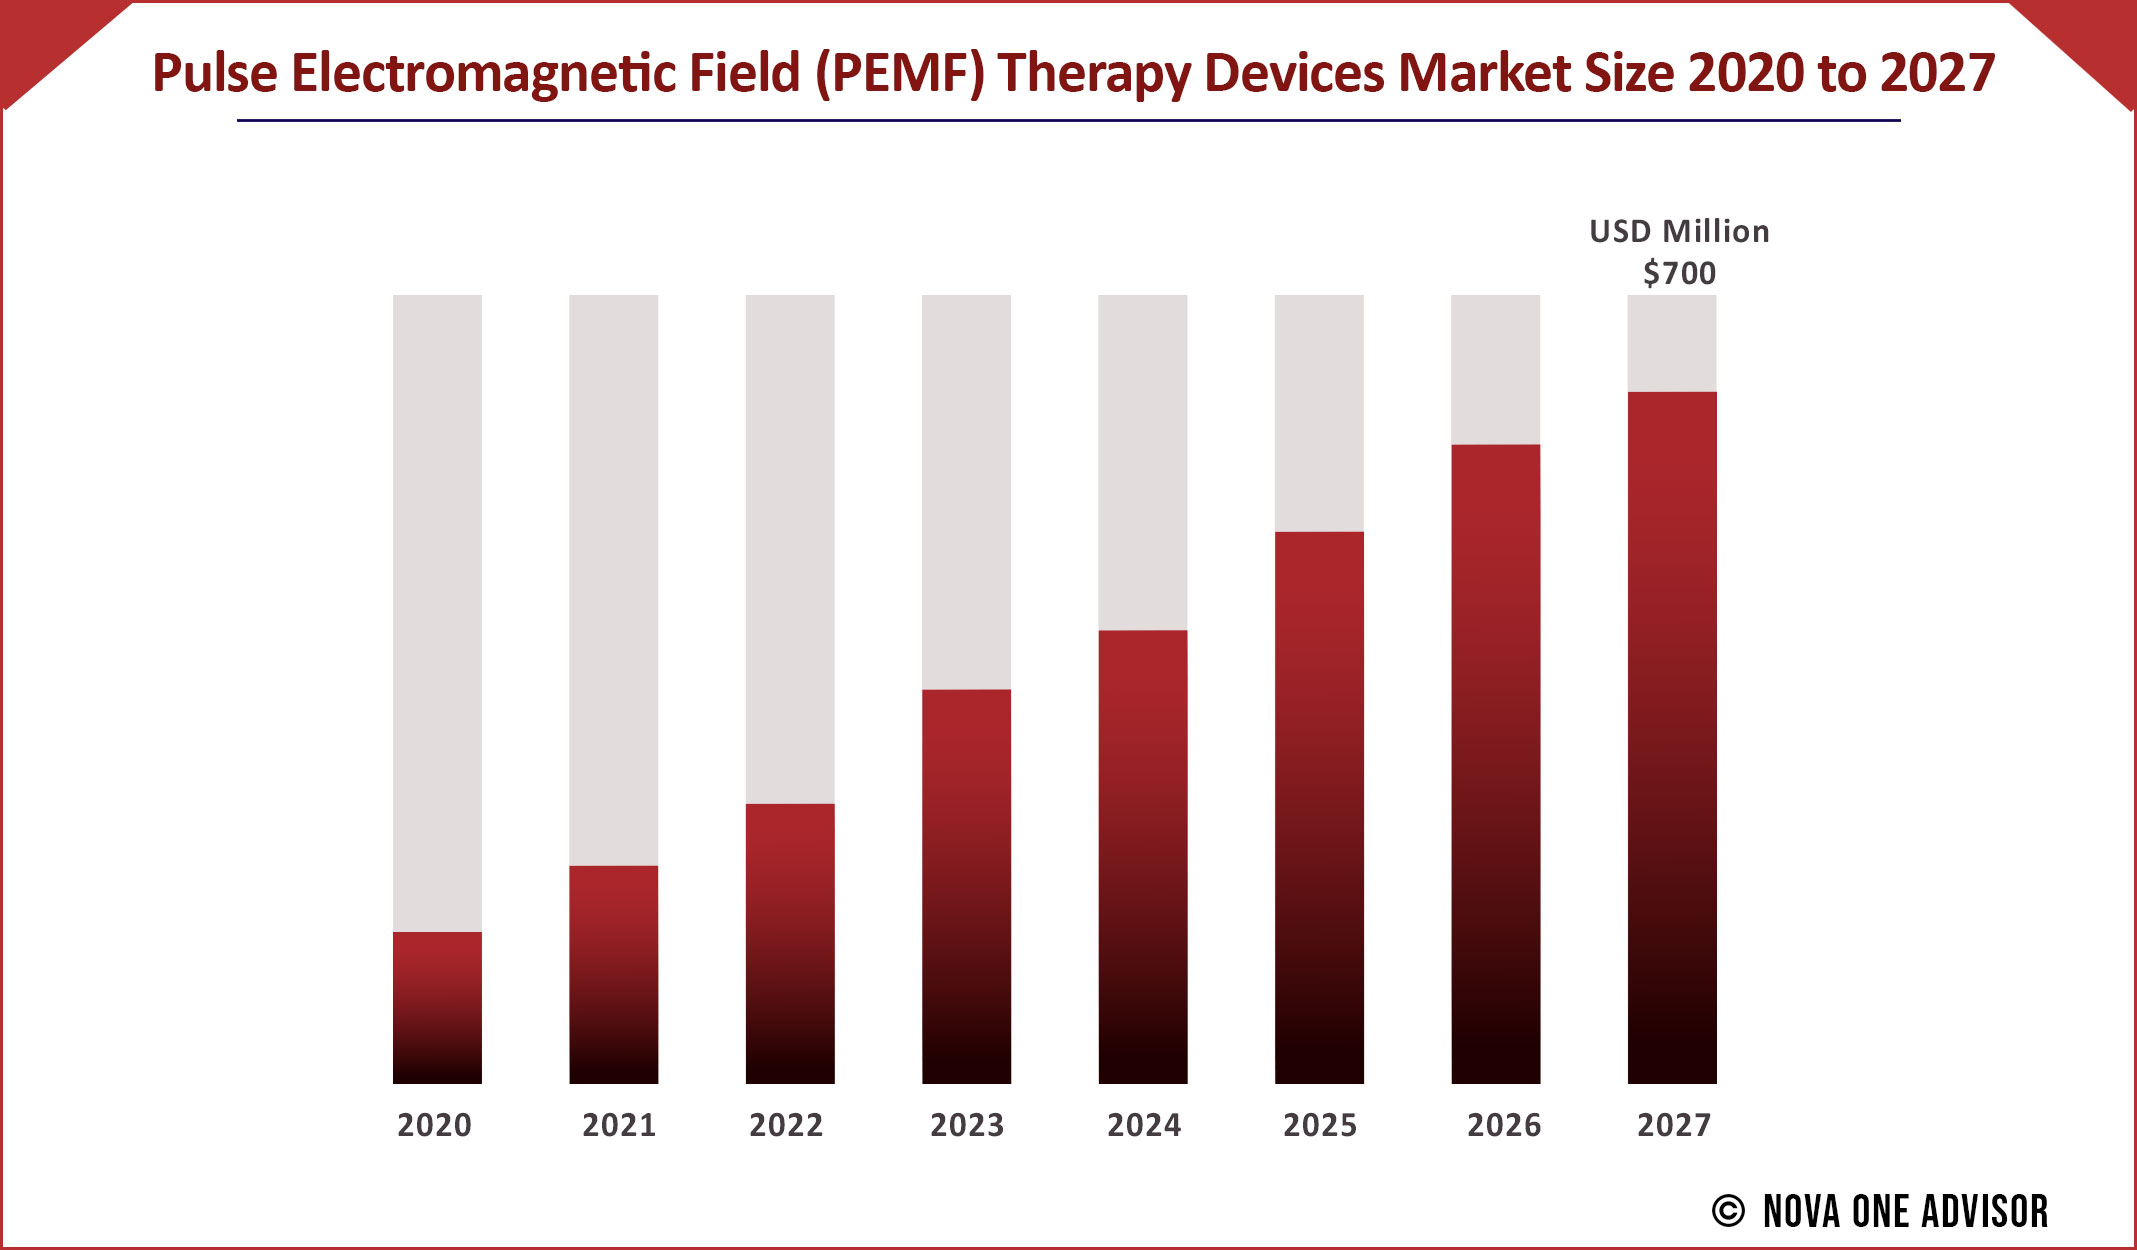 Pulse Electromagnetic Field (PEMF) Therapy Devices Market Size 2020 to 2027